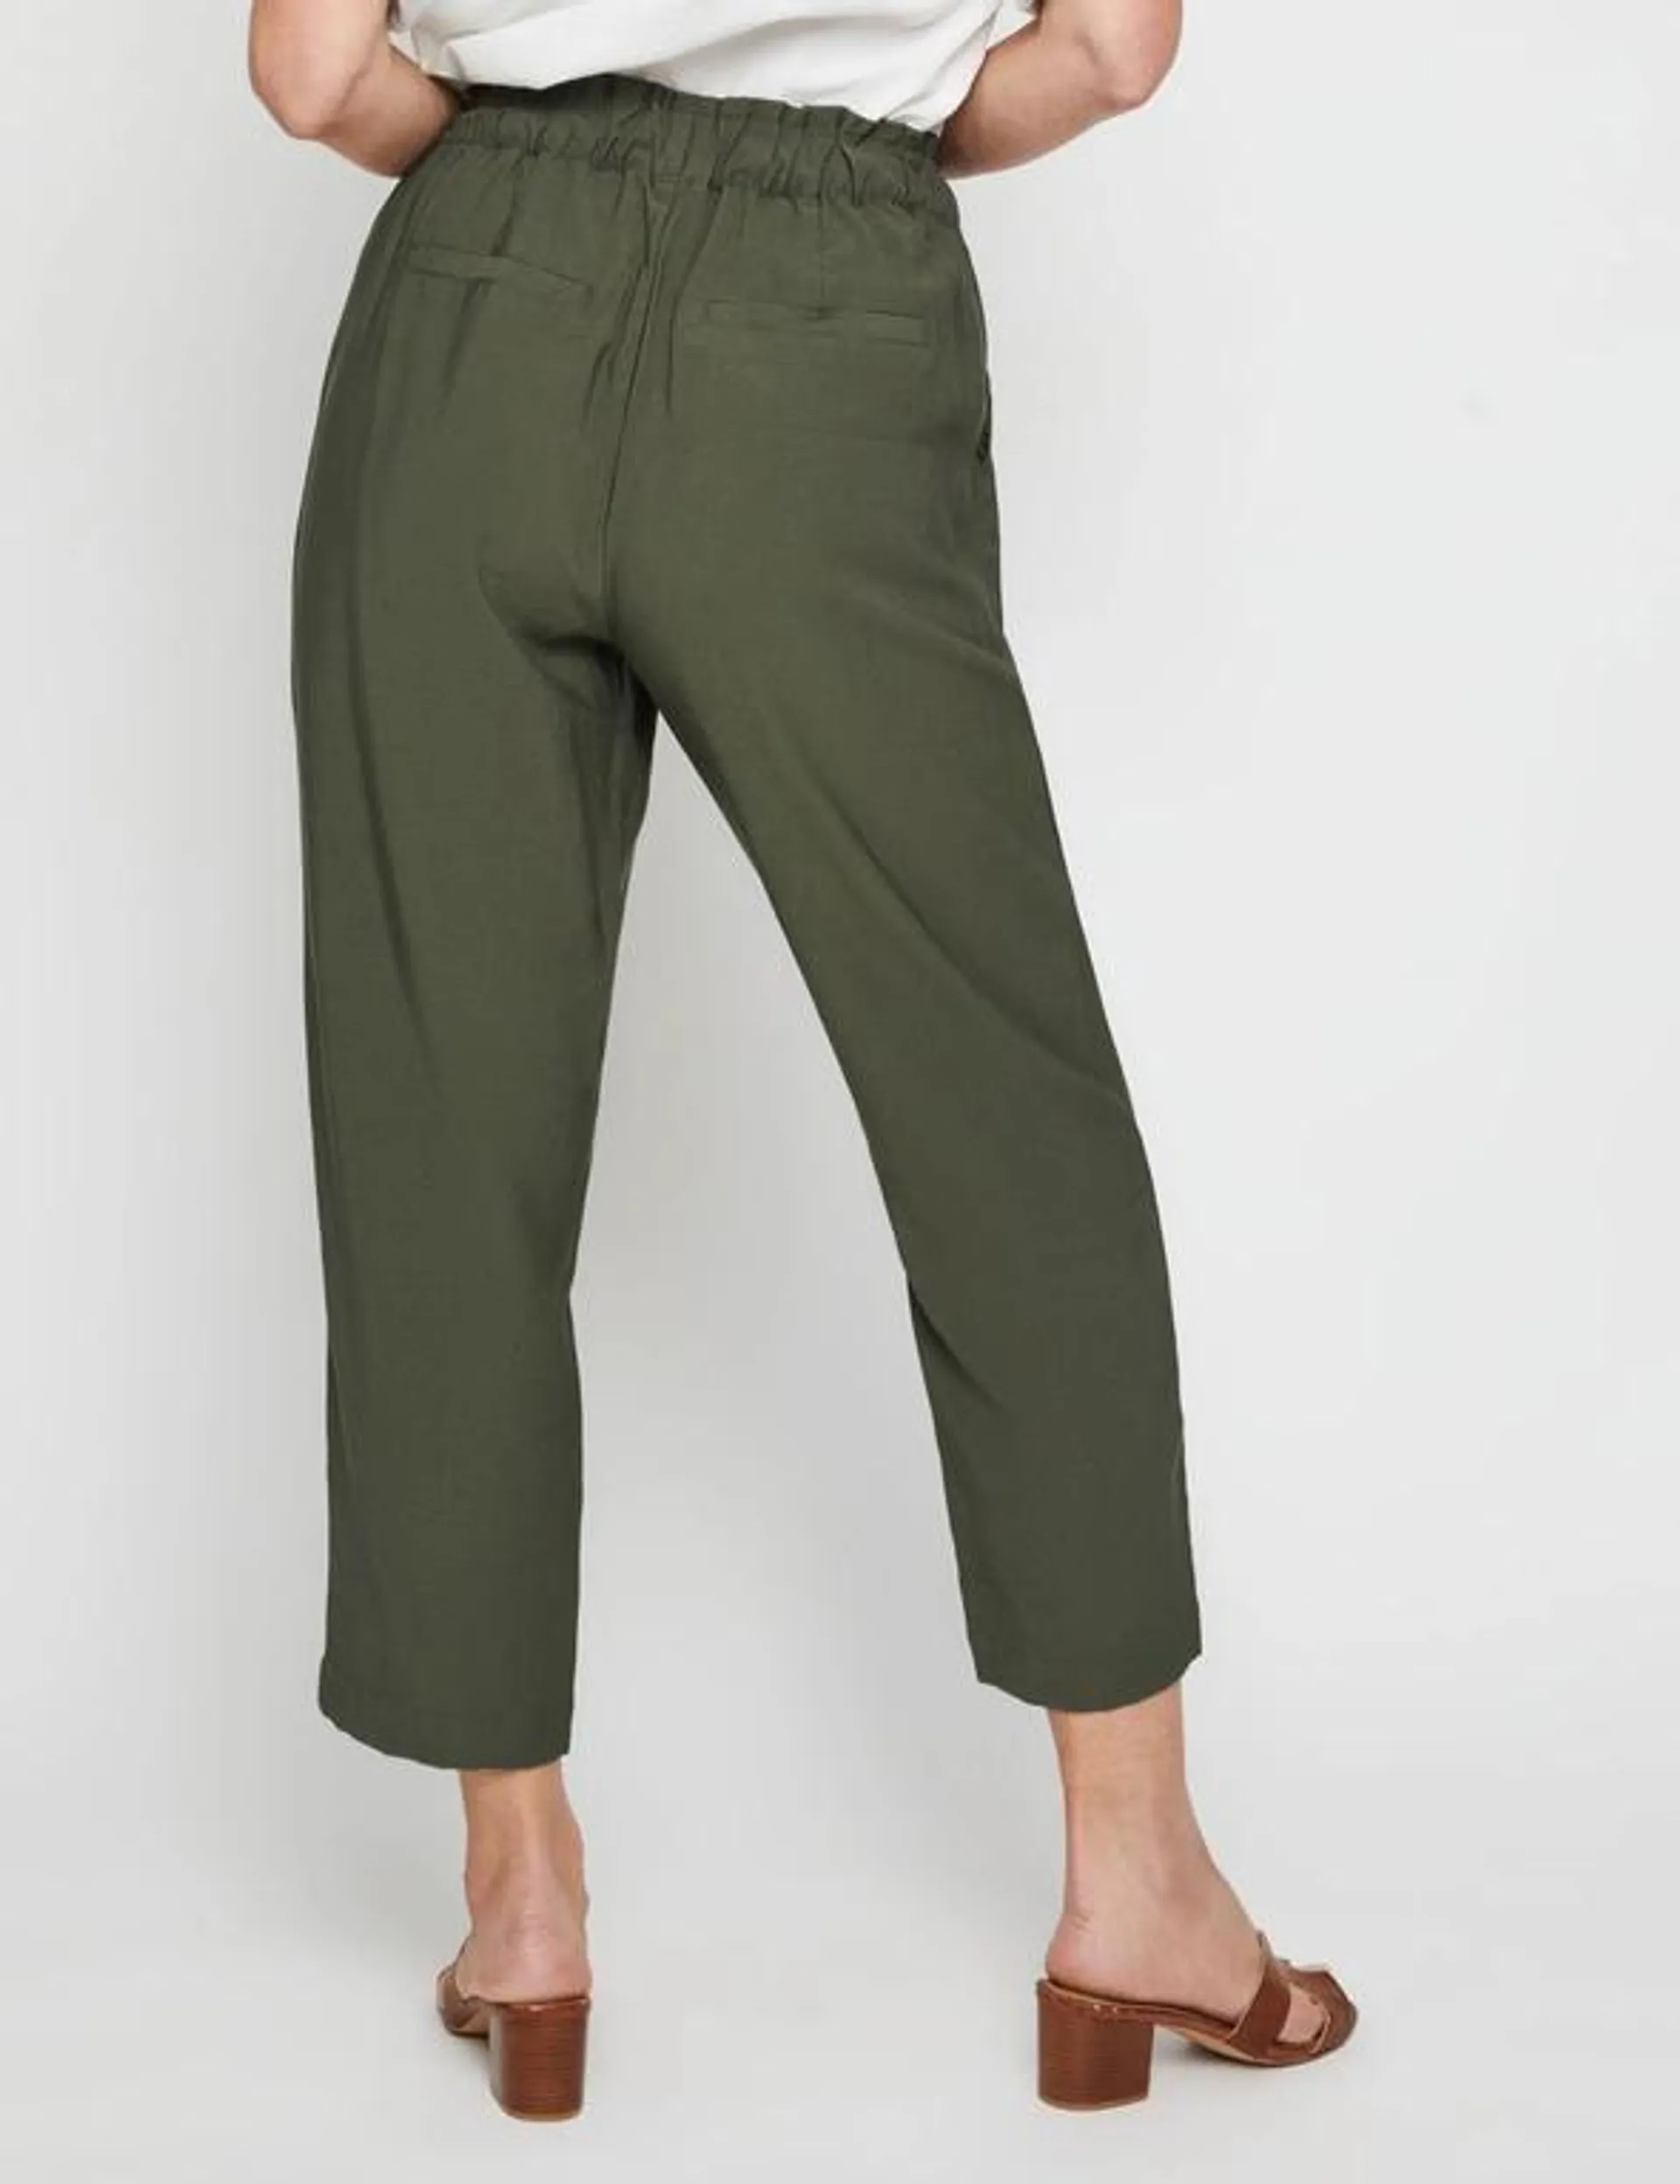 Millers Ankle Length Jogger Pant